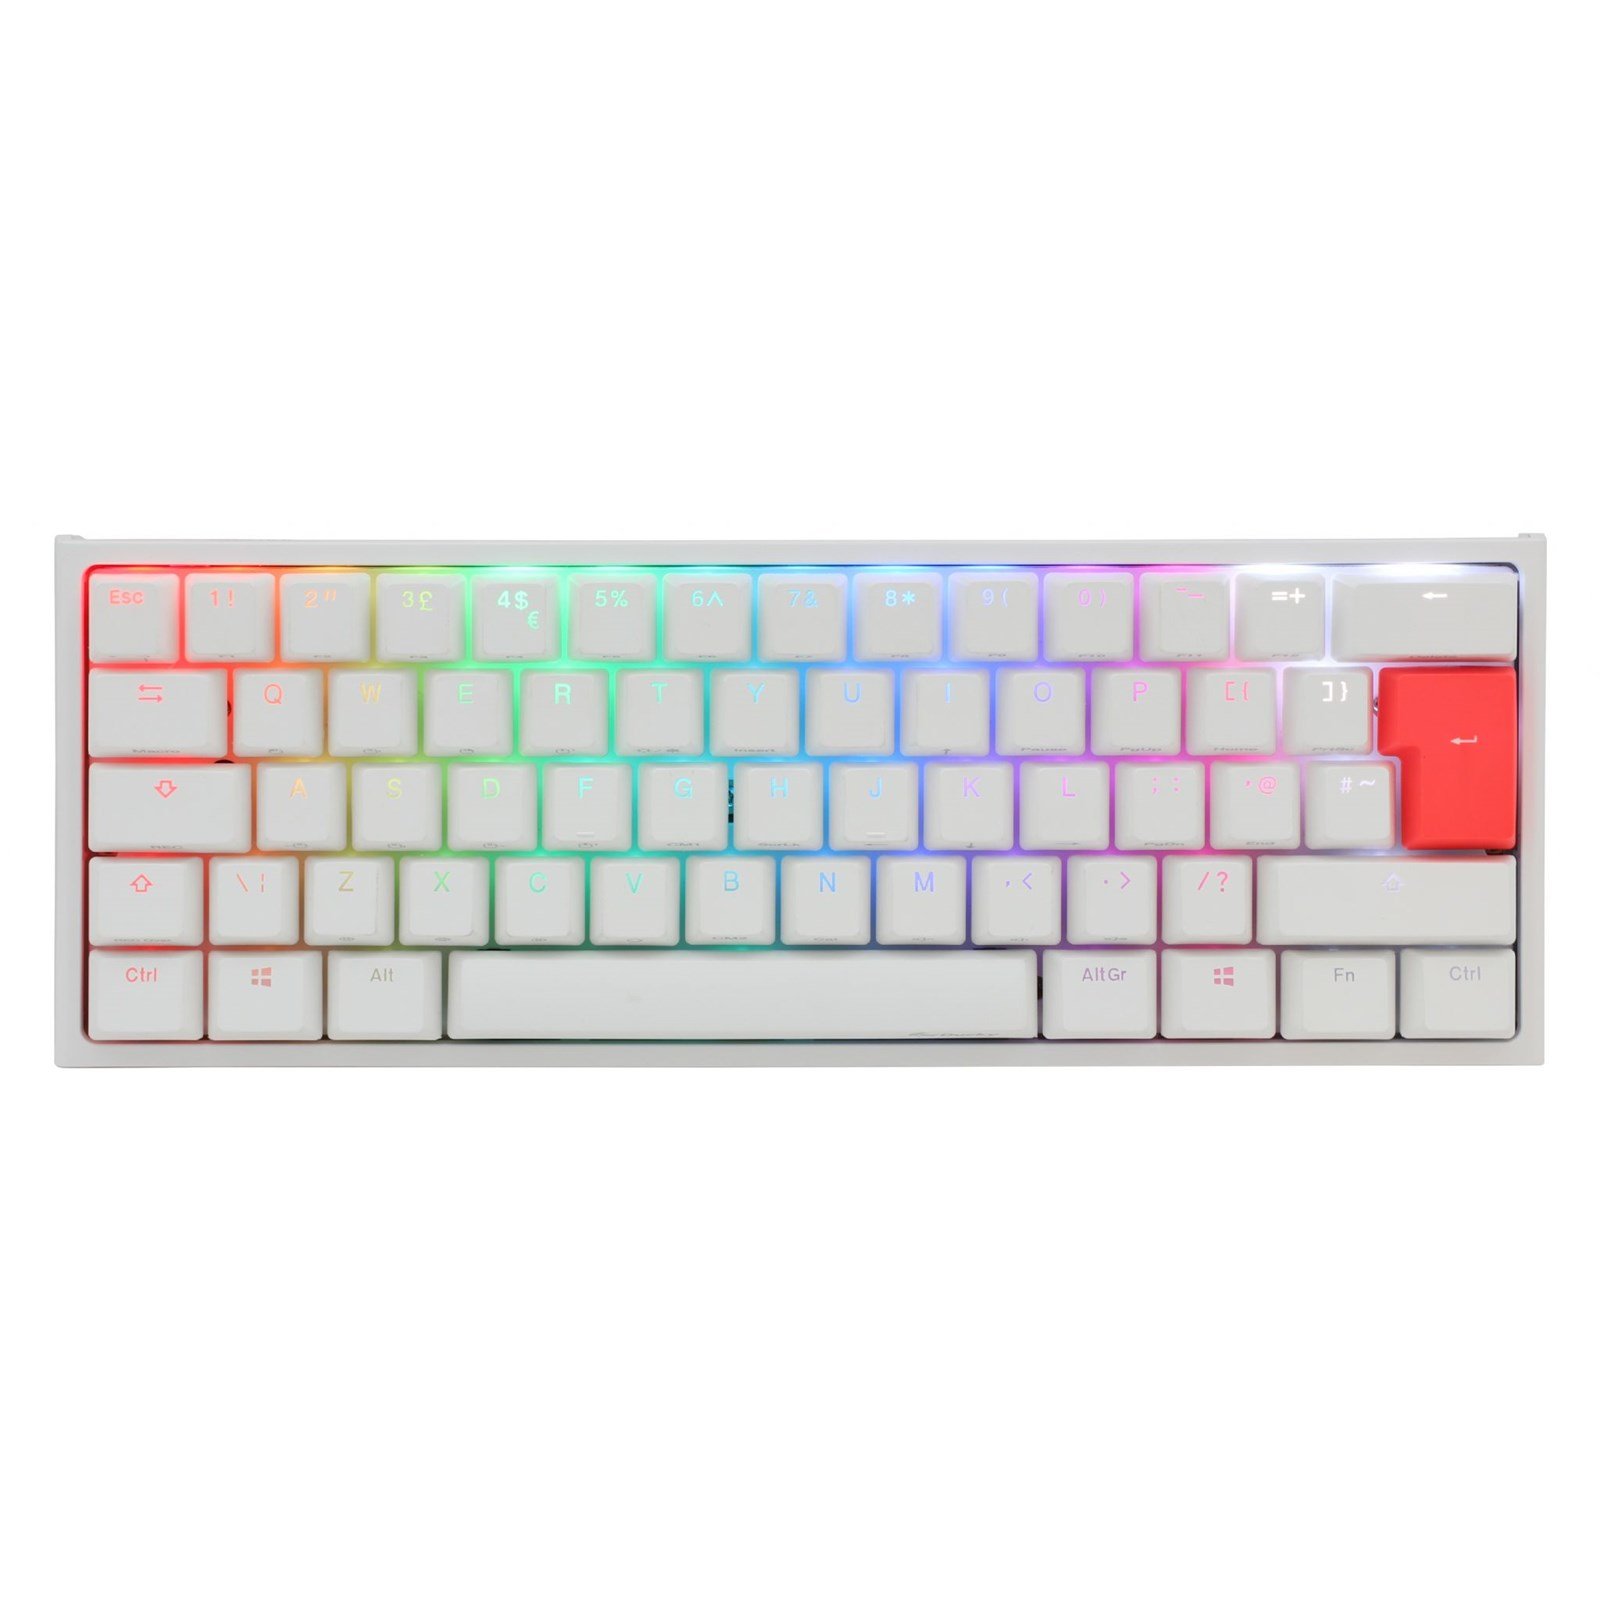 Ducky One 2 Mini Rgb Mechanical Keyboard In White With Cherry Mx Speed Silver Switches Uk Layout Dkon61st Pukpdwwt1 Ccl Computers